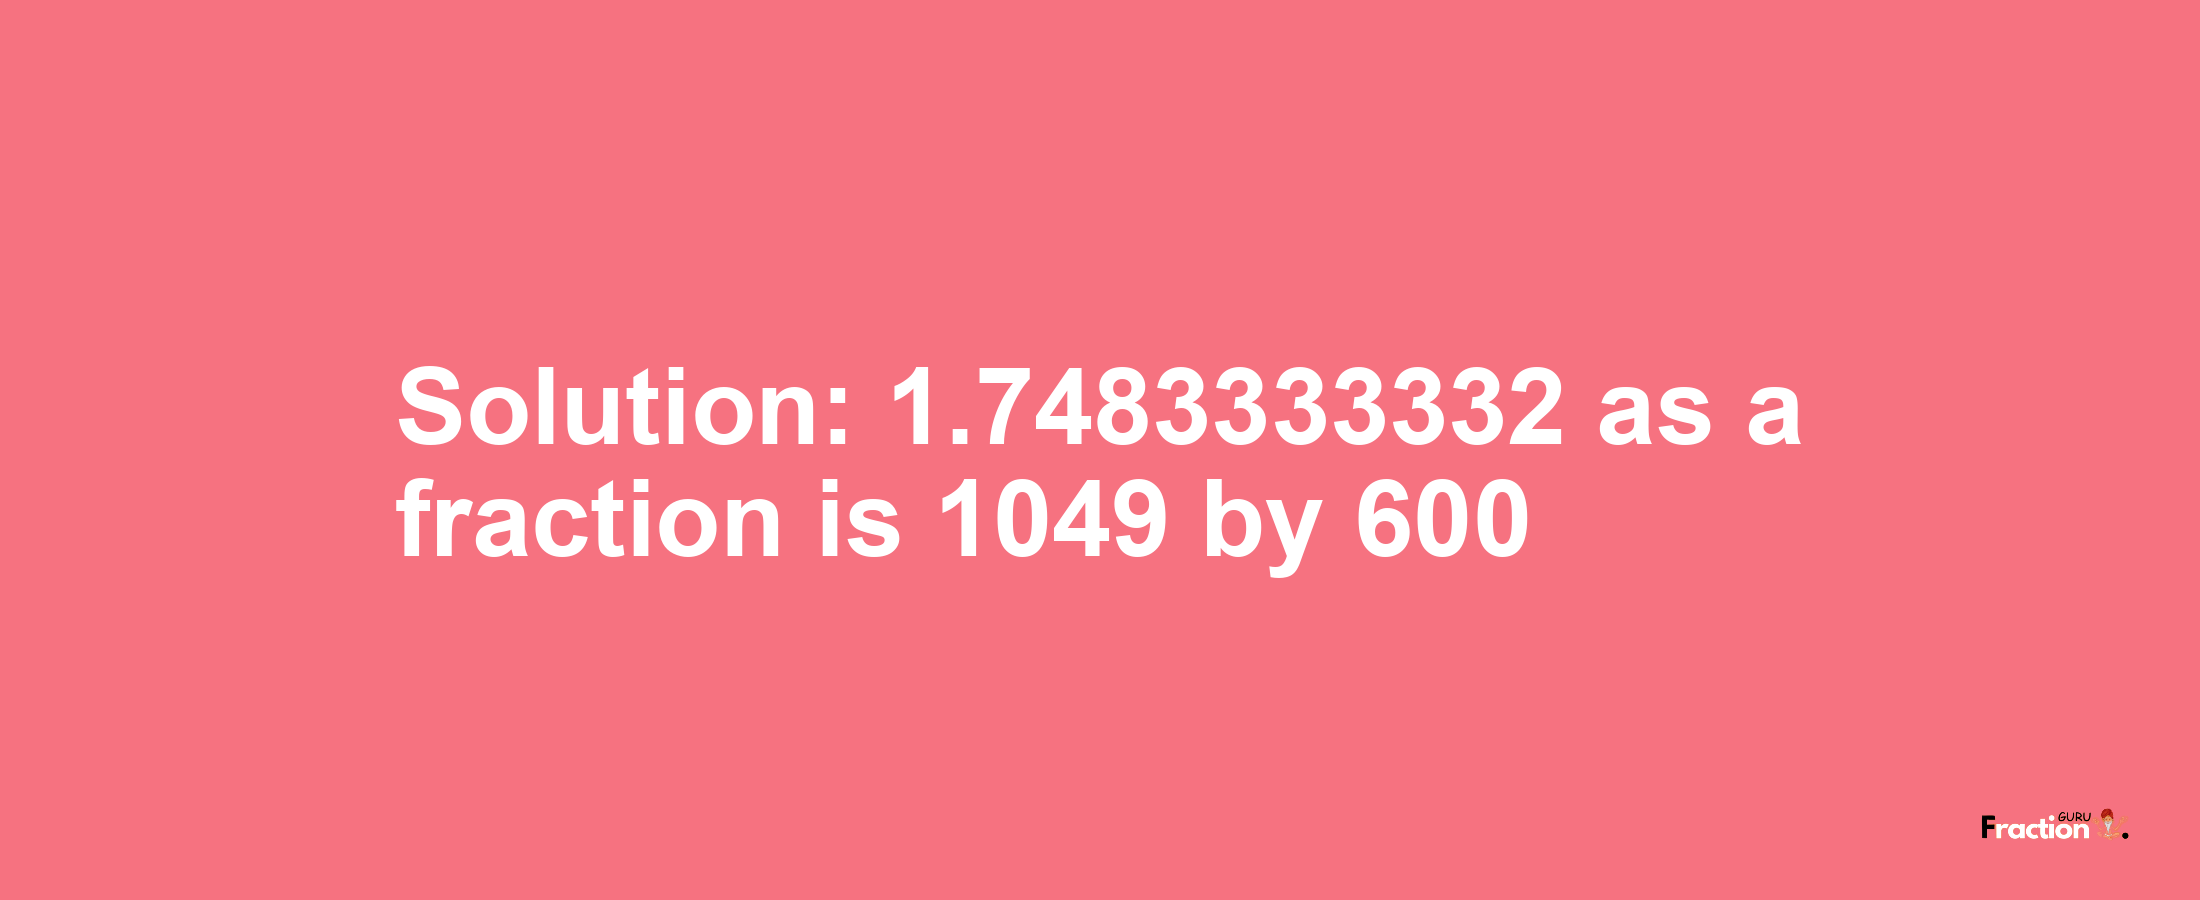 Solution:1.7483333332 as a fraction is 1049/600